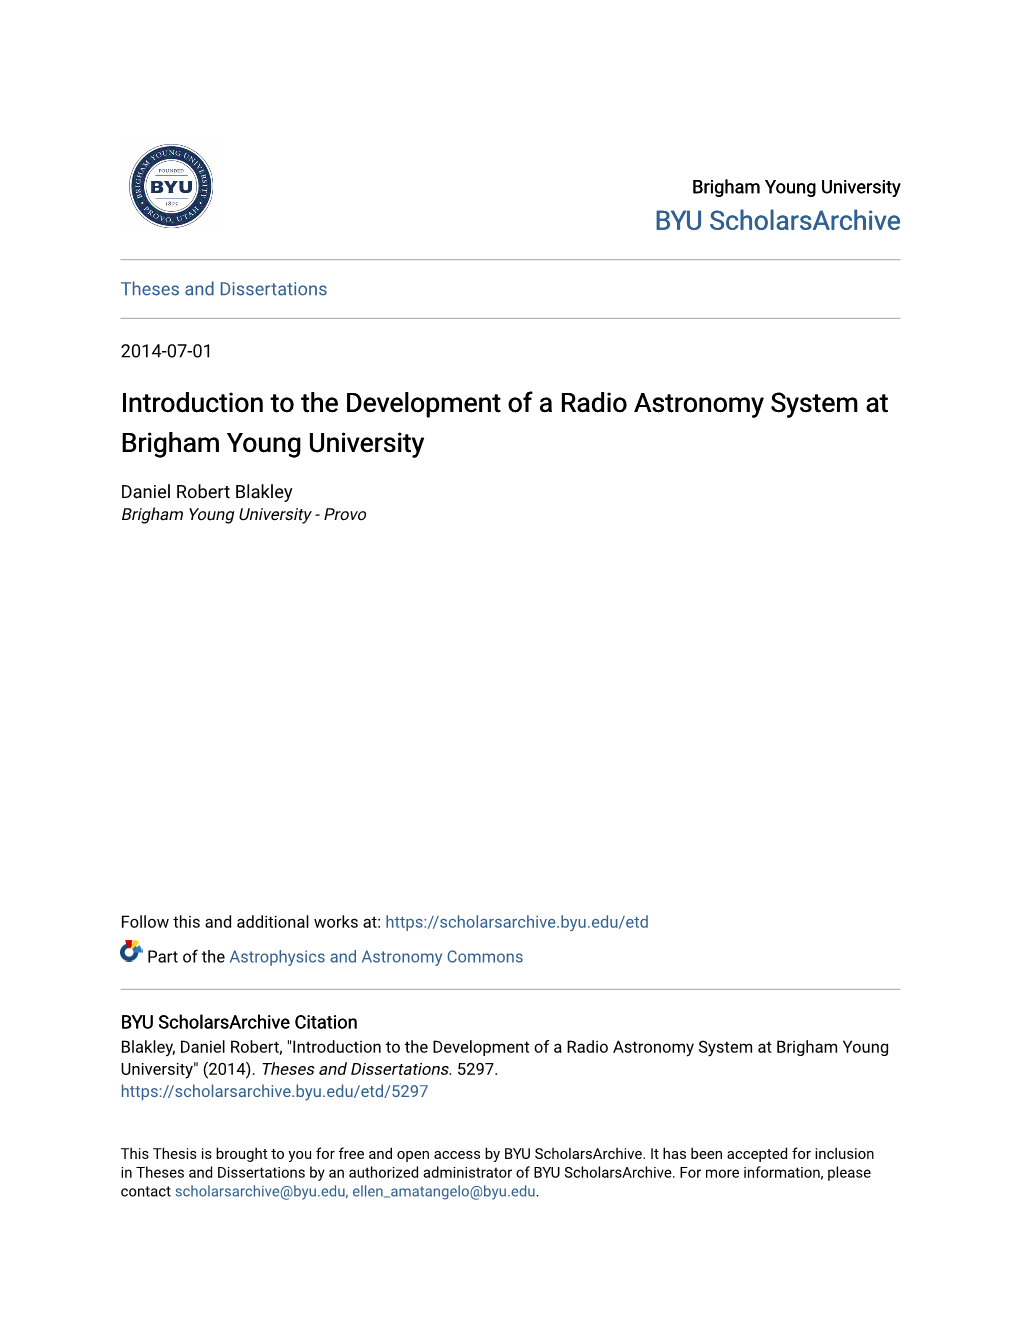 Introduction to the Development of a Radio Astronomy System at Brigham Young University